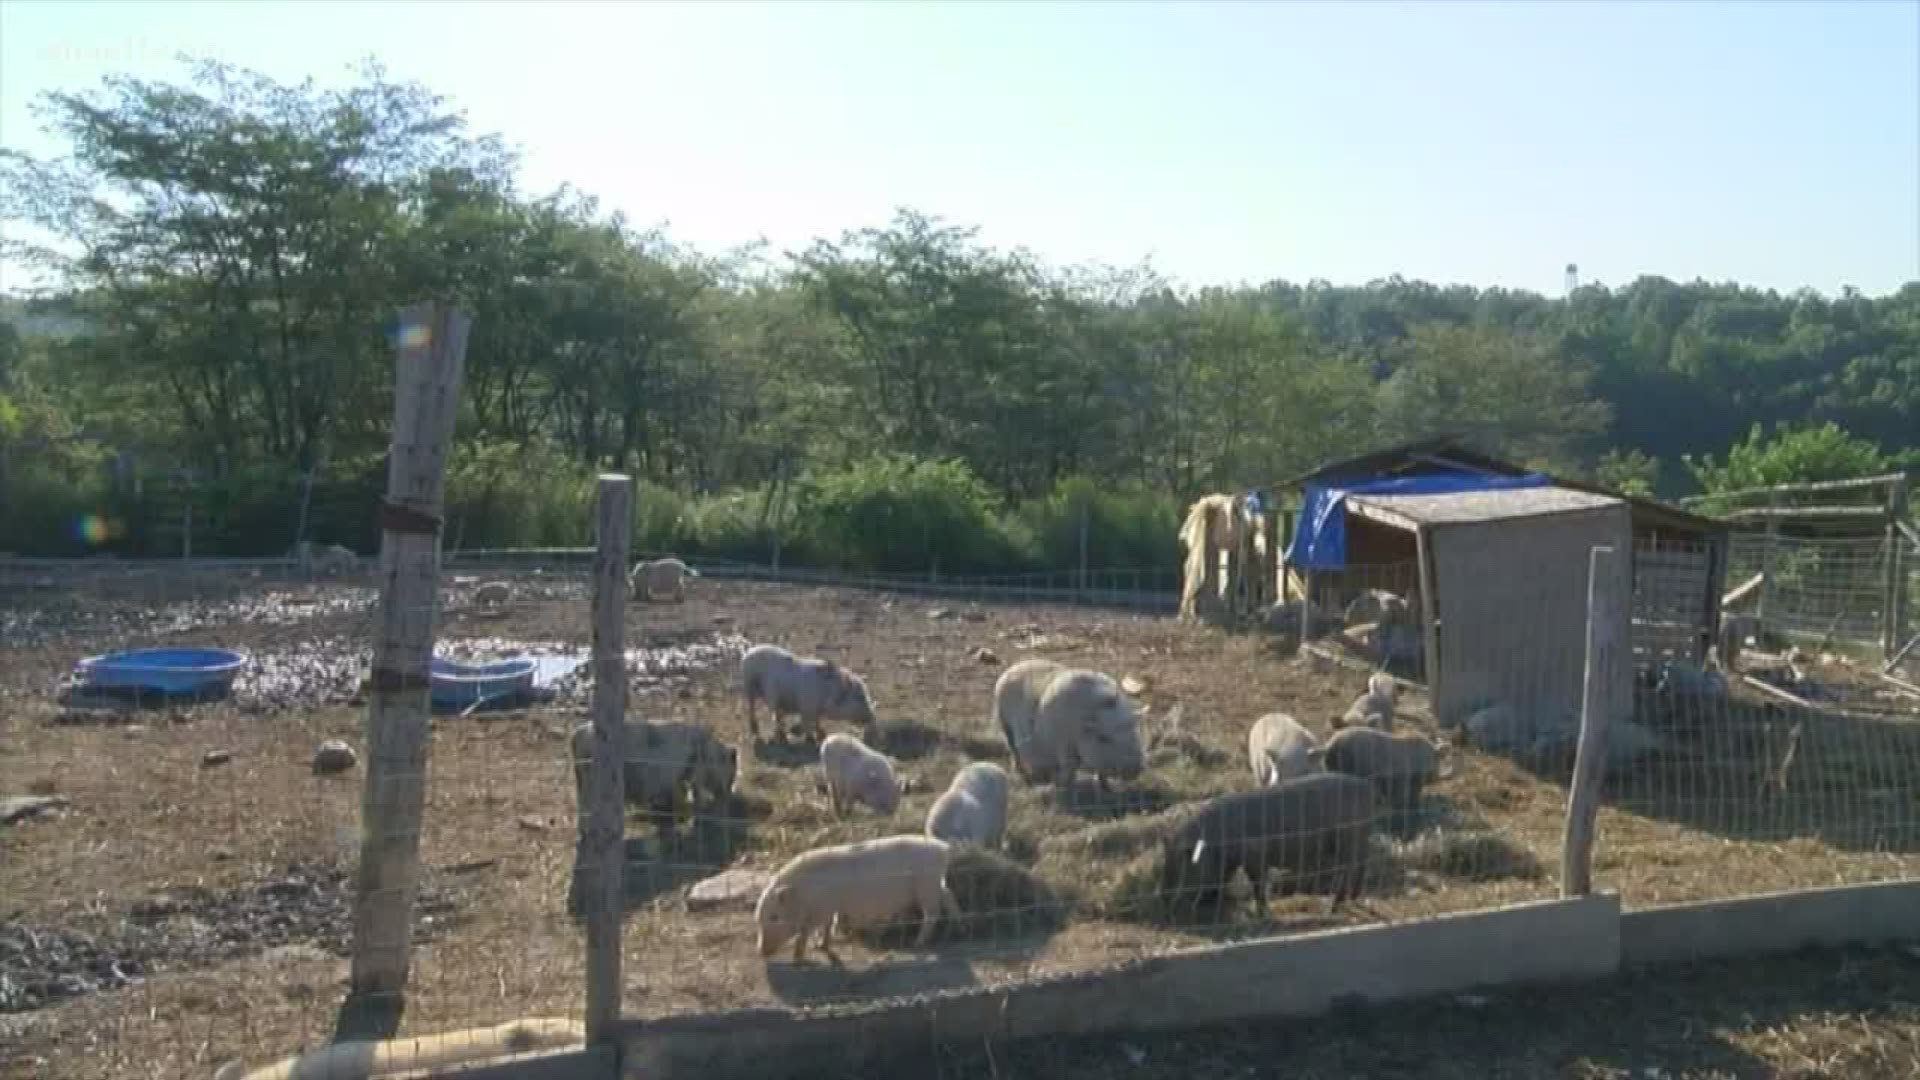 Groups work to find homes for rescued pigs